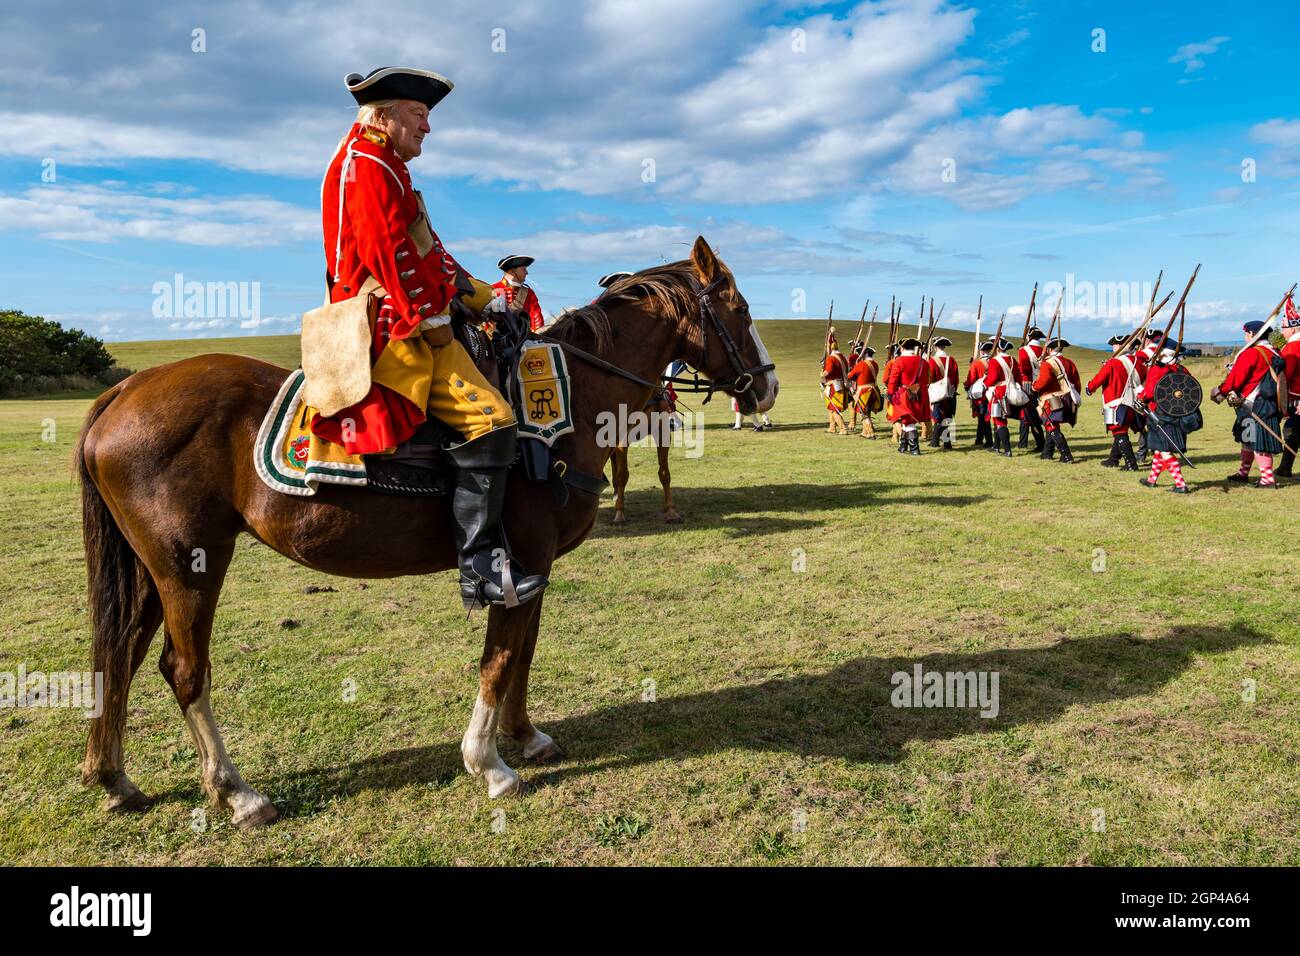 Hanoverian redcoat soldiers in period costume march with officer on horse in re-enactment of Battle of Prestonpans, East Lothian, Scotland, UK Stock Photo